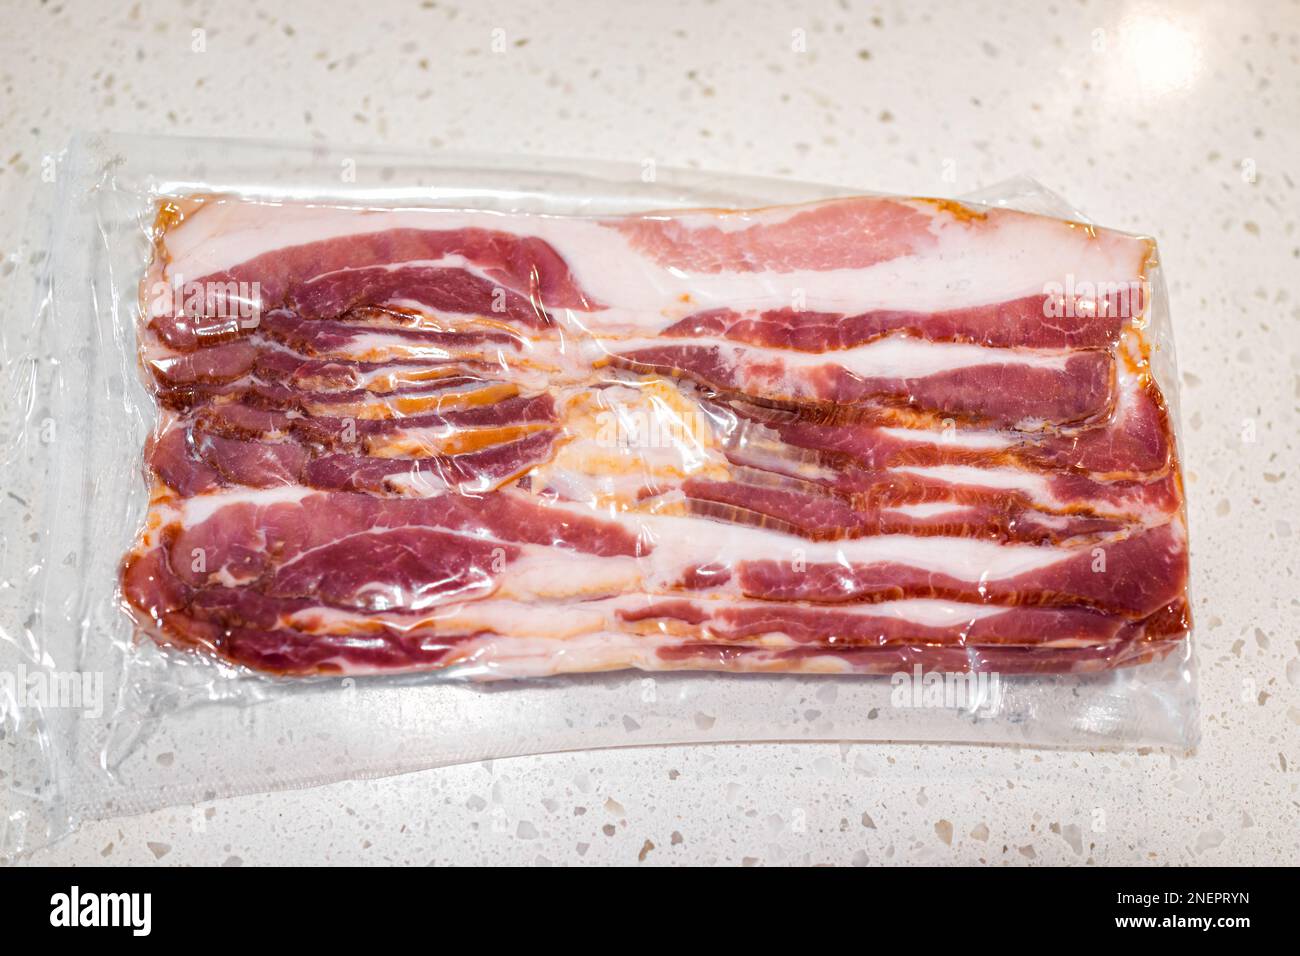 Raw uncured bacon meat vacuum sealed packaged in plastic closeup with fat and meat from above view Stock Photo